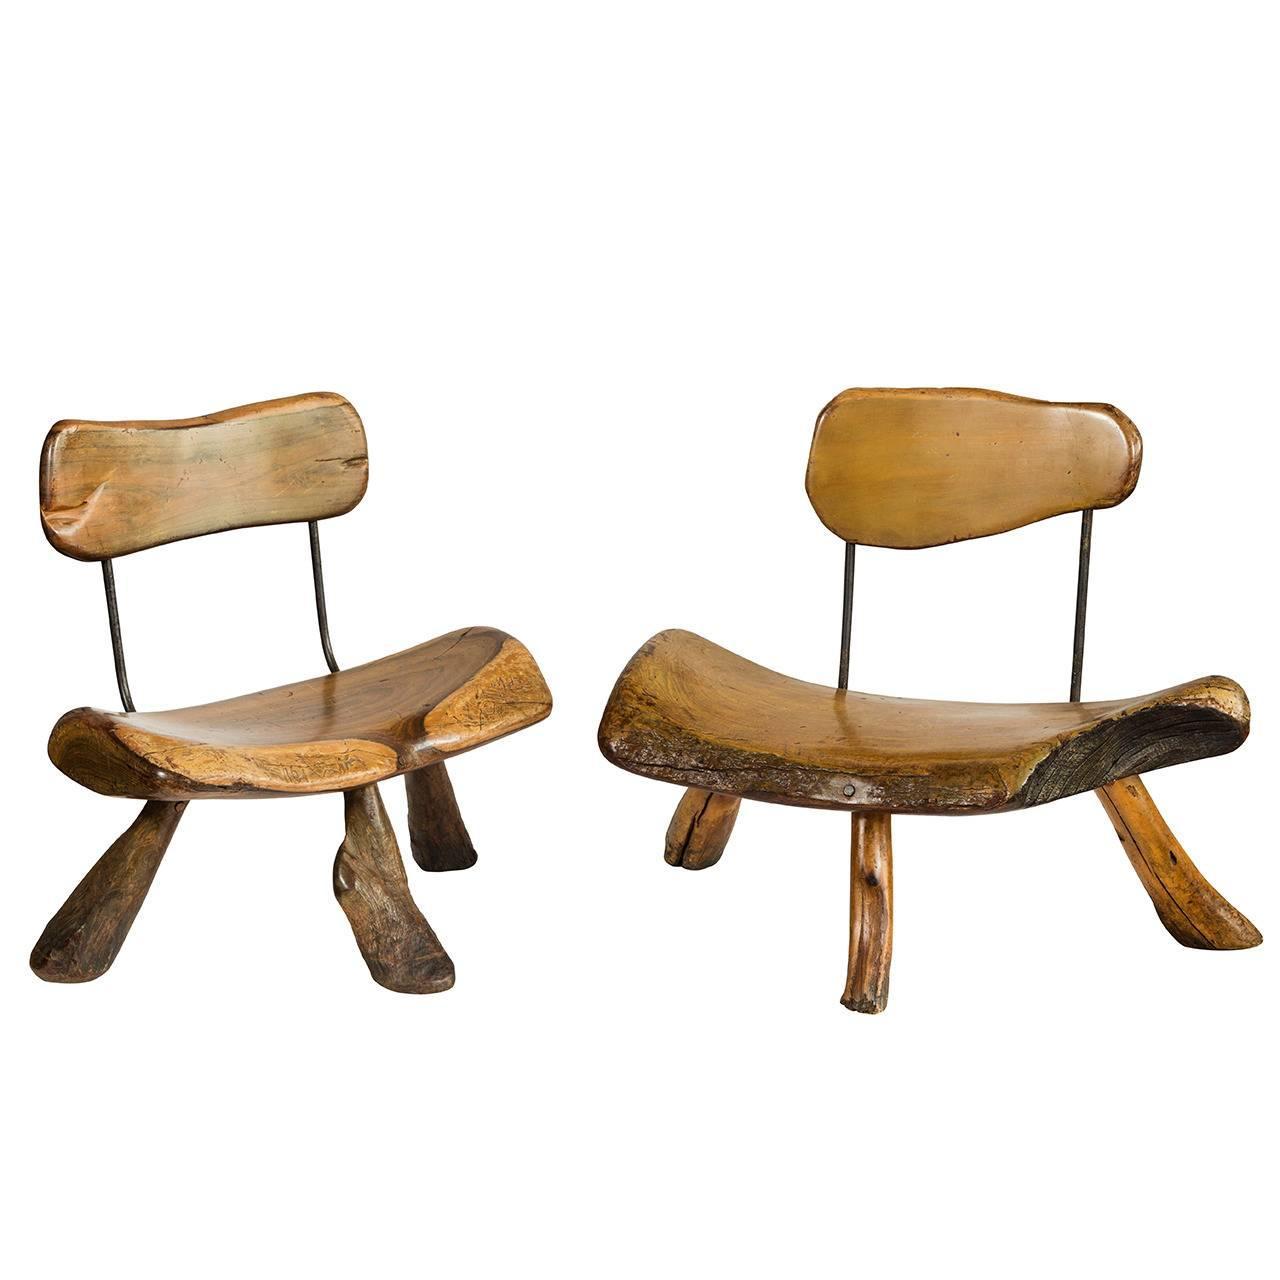 Handmade wood and iron chairs For Sale at 1stDibs